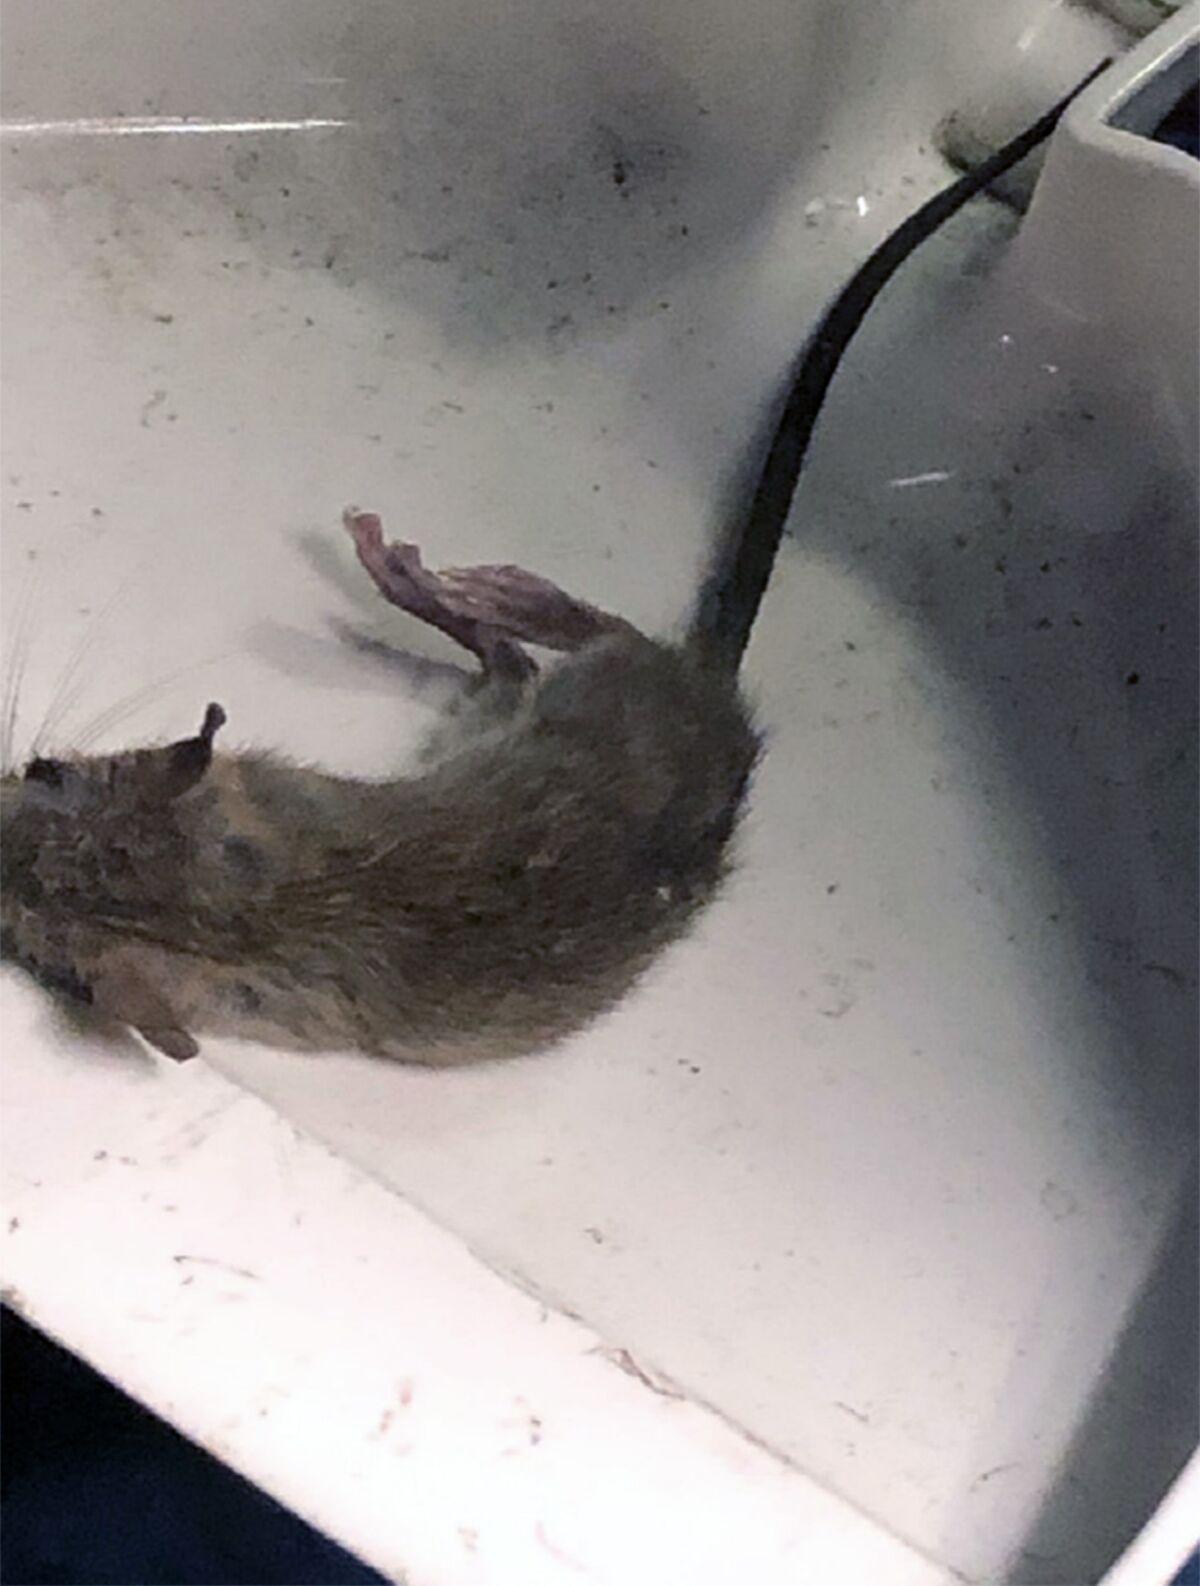 Rat was in an examination room in the Vista jail.